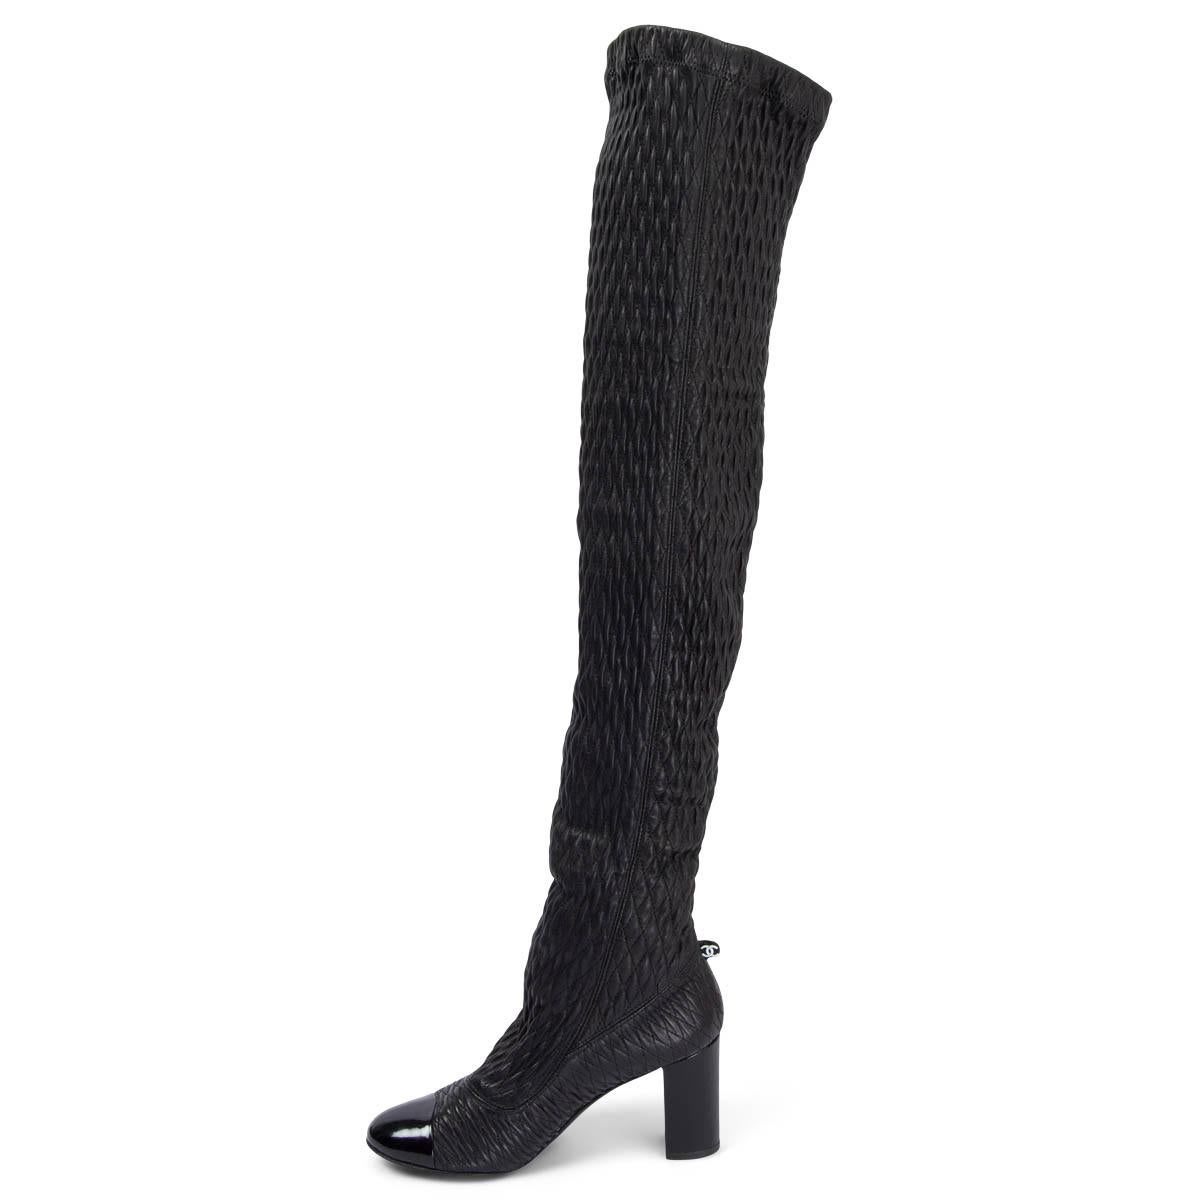 Black CHANEL black QUILTED STRETCH leather OVER KNEE BLOCK HEEL Boots Shoes 36.5 For Sale